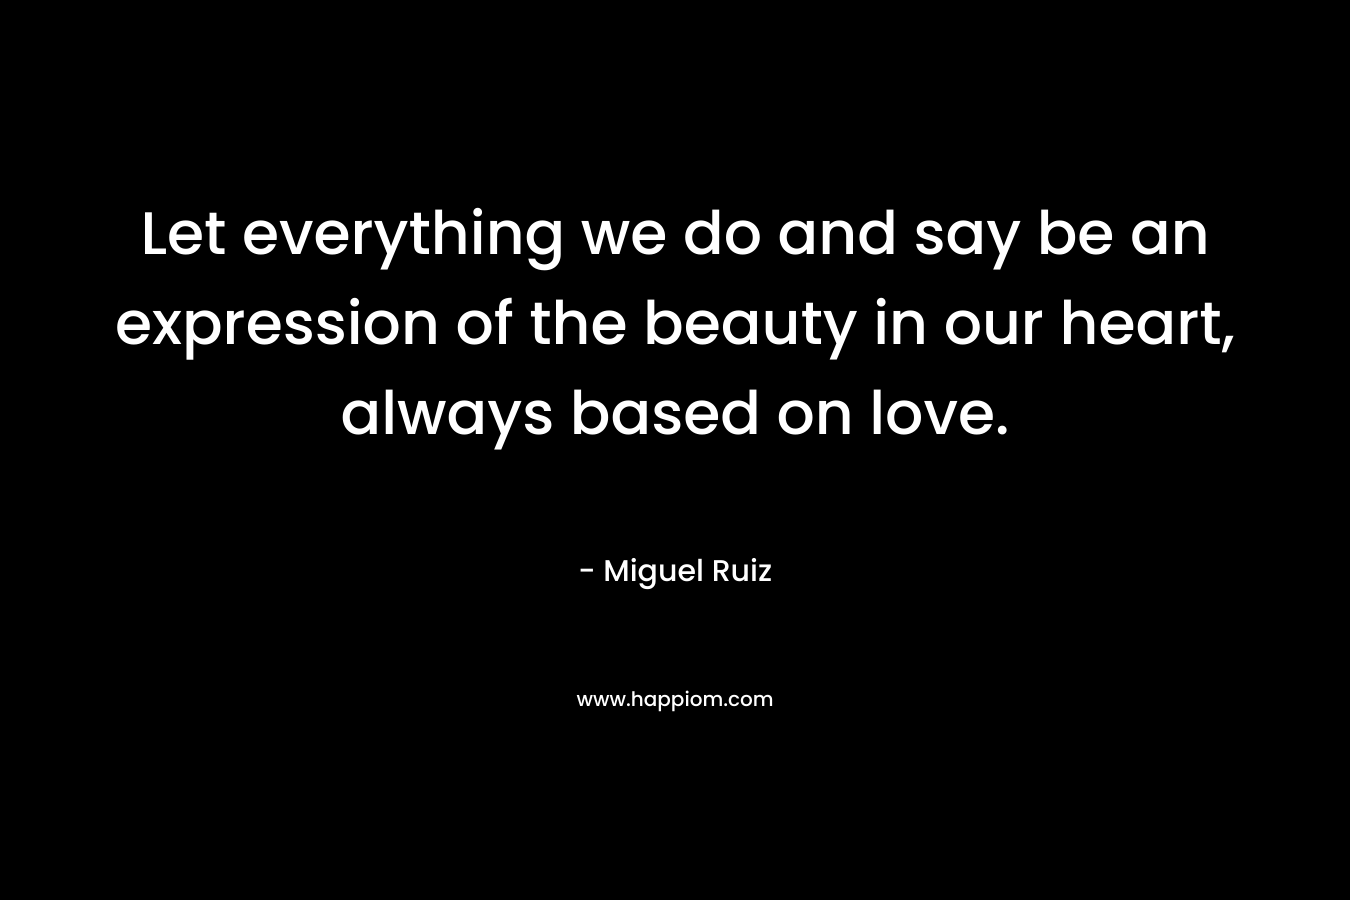 Let everything we do and say be an expression of the beauty in our heart, always based on love. – Miguel Ruiz